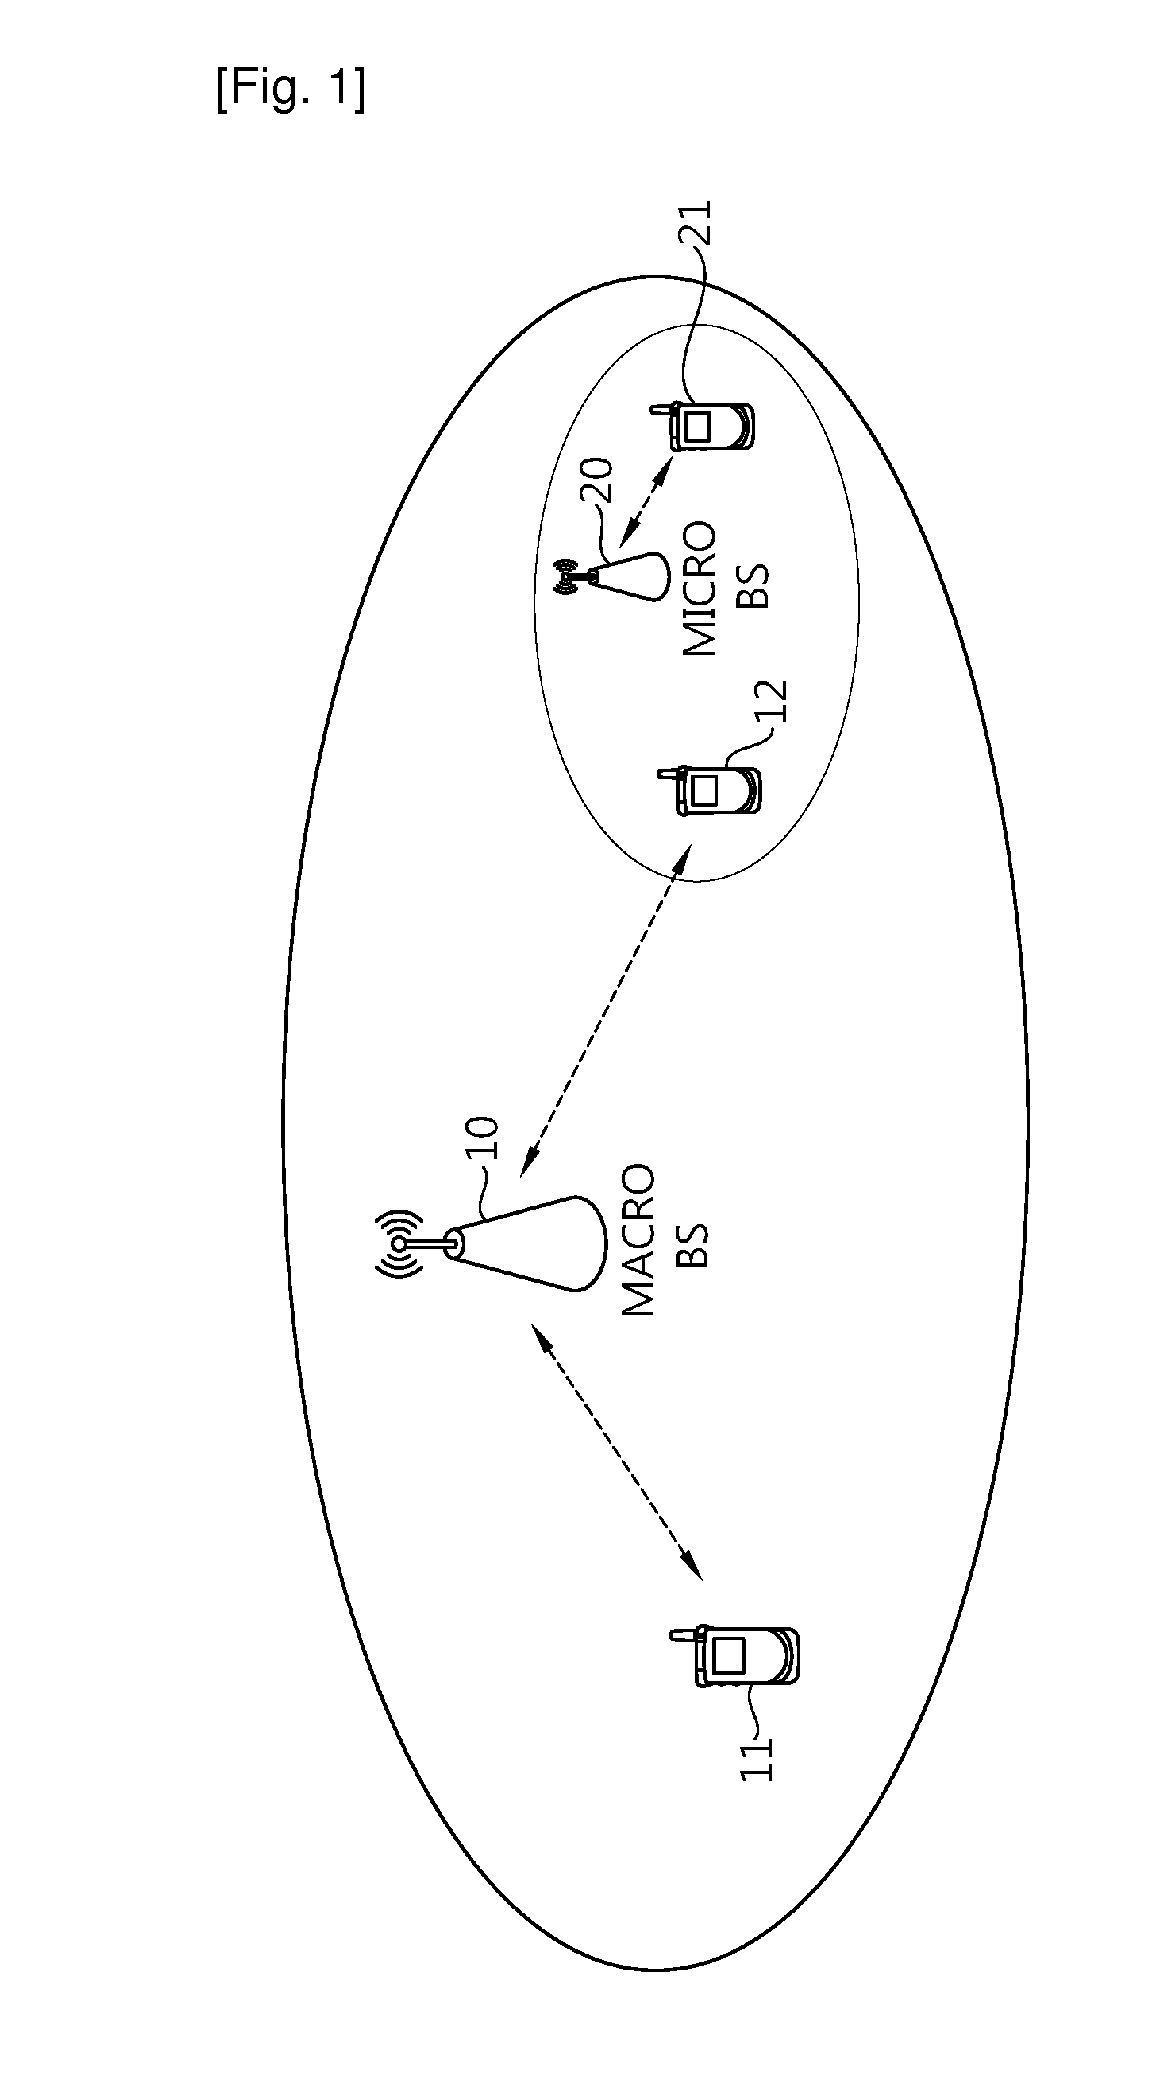 Method and apparatus for mitigating inter-cell interference in wireless communication system